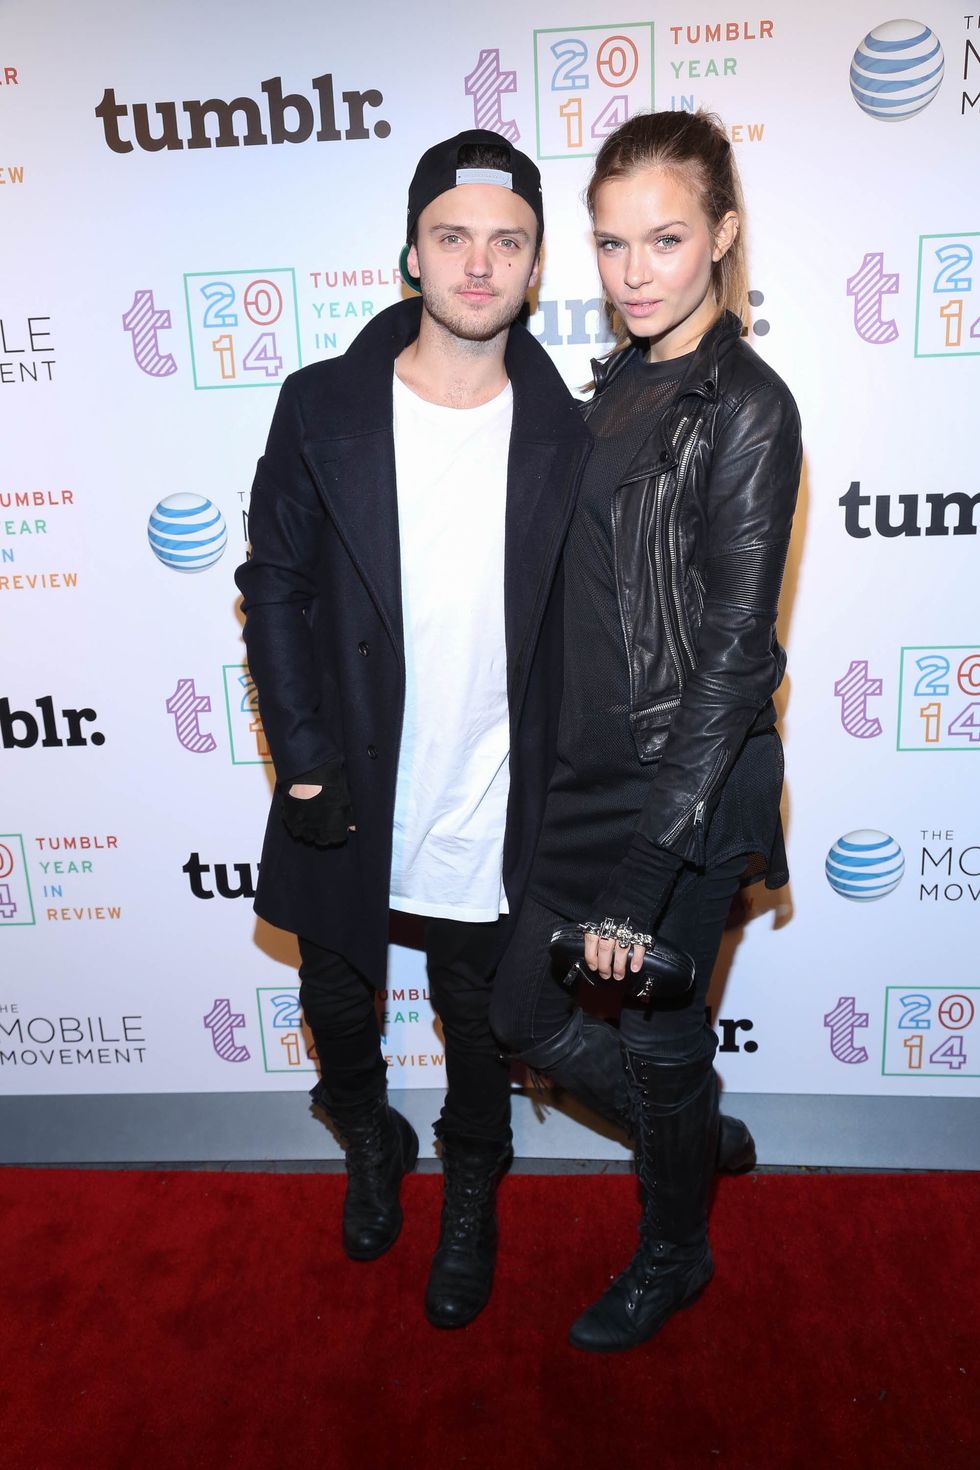 NEW YORK, NY - DECEMBER 10:  Josephine Skriver (R) and Alexander Deleon attend Tumblr's Year In Review 2014 at Brooklyn Night Bazaar on December 10, 2014 in New York City.  (Photo by Rob Kim/Getty Images for Tumblr)